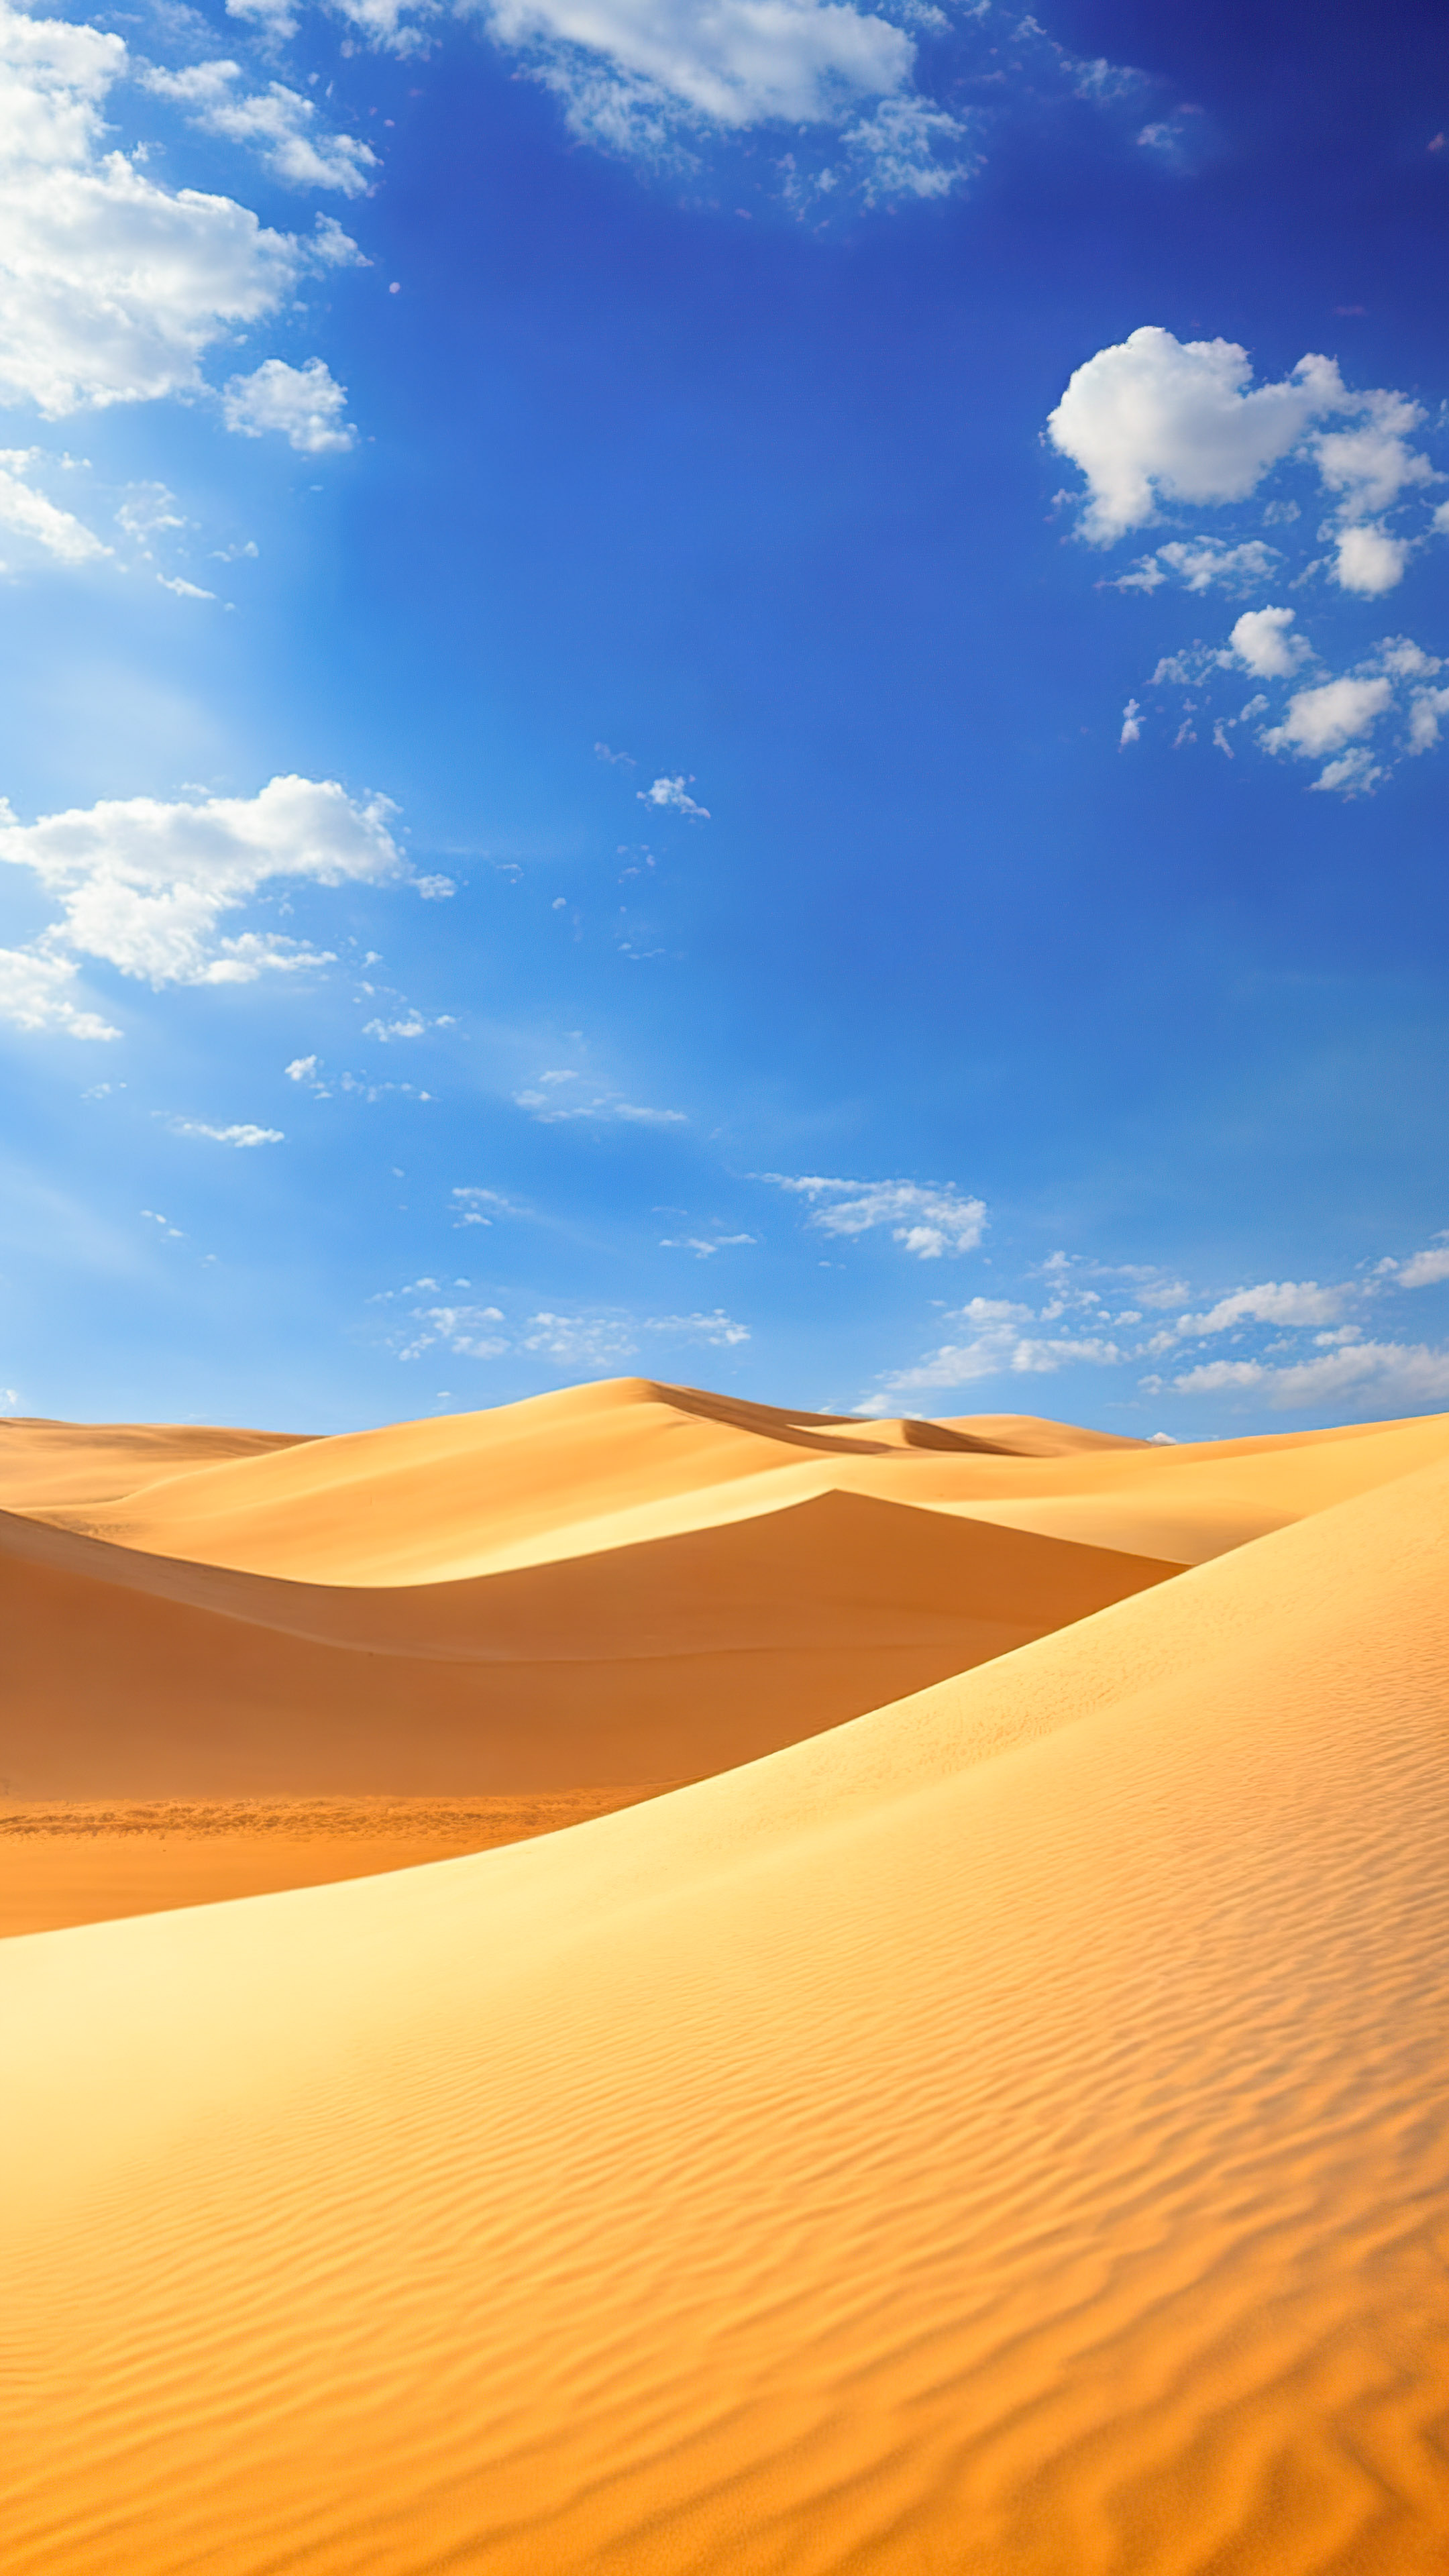 Enjoy the calmness of a serene desert landscape with sand dunes stretching to the horizon under a vast, blue sky, with our sunny sky background.